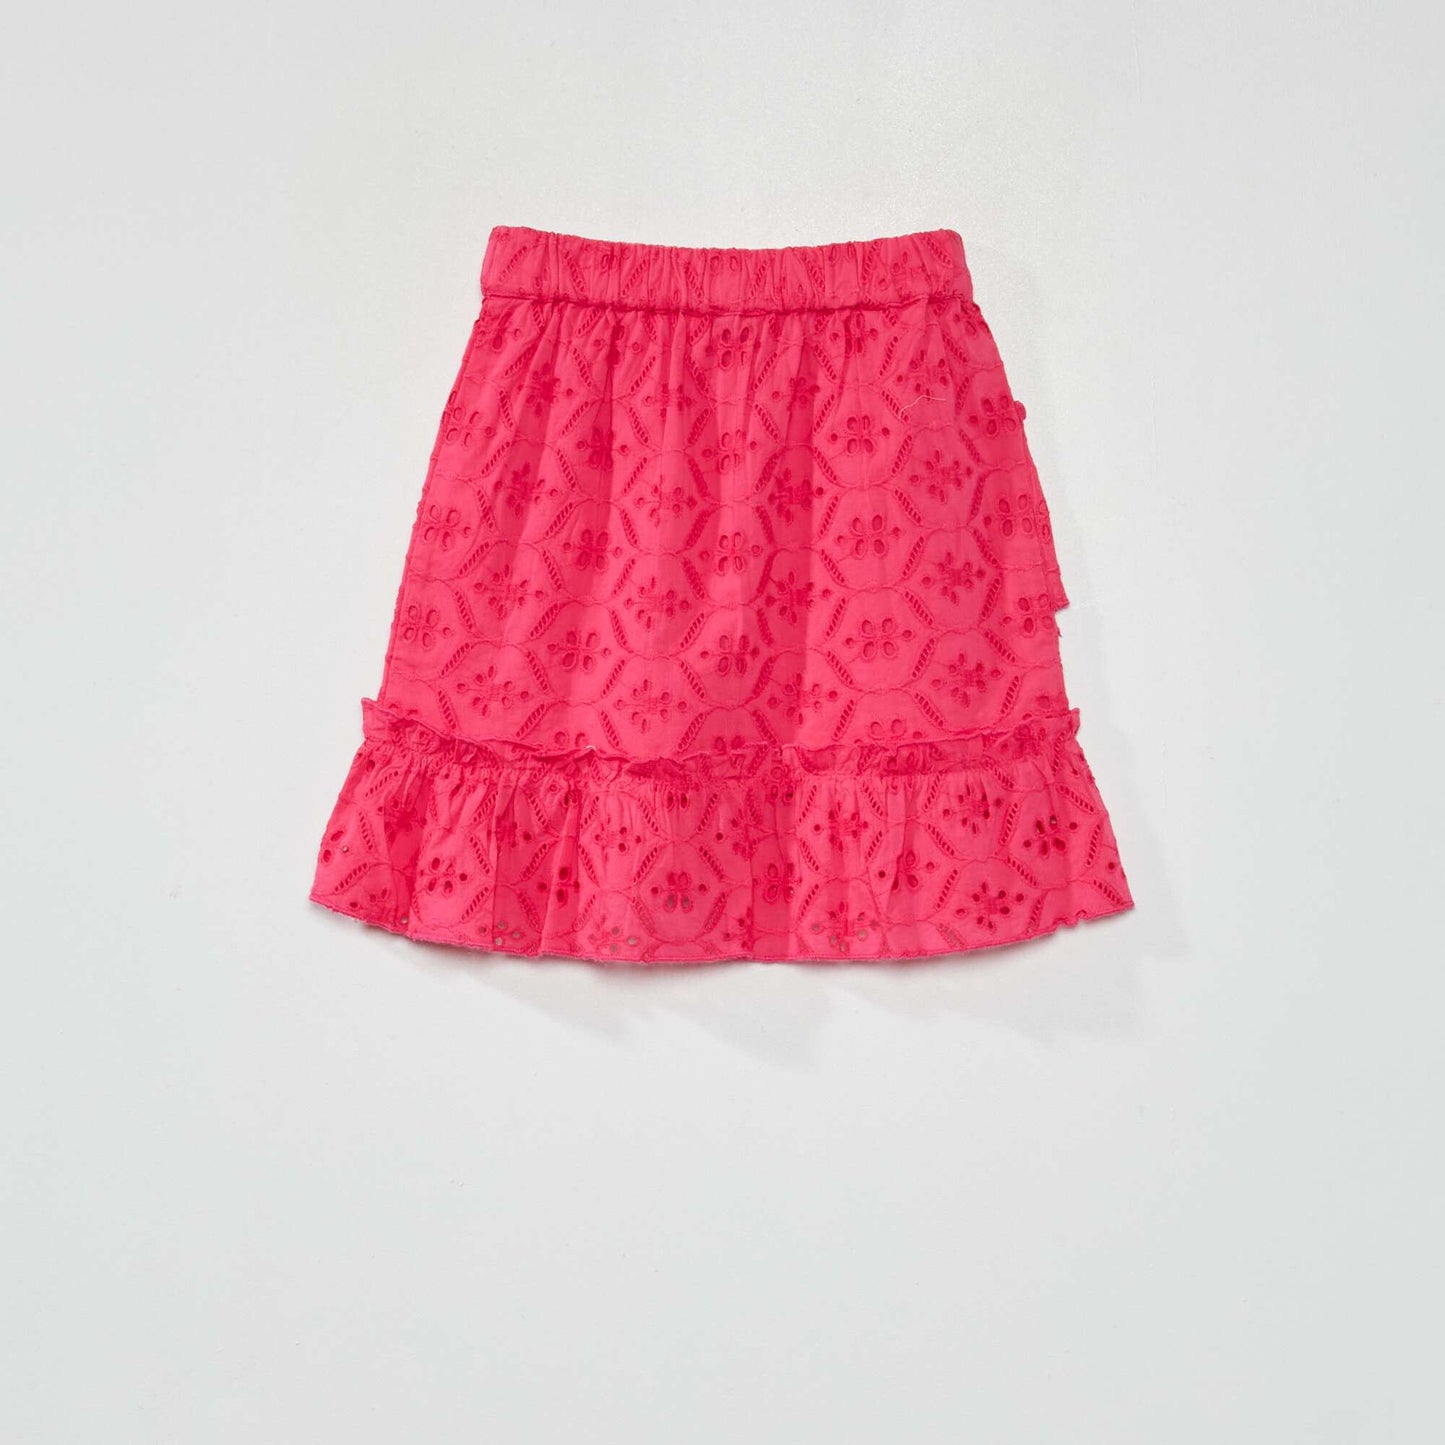 Jupe courte avec broderie anglaise rose indien